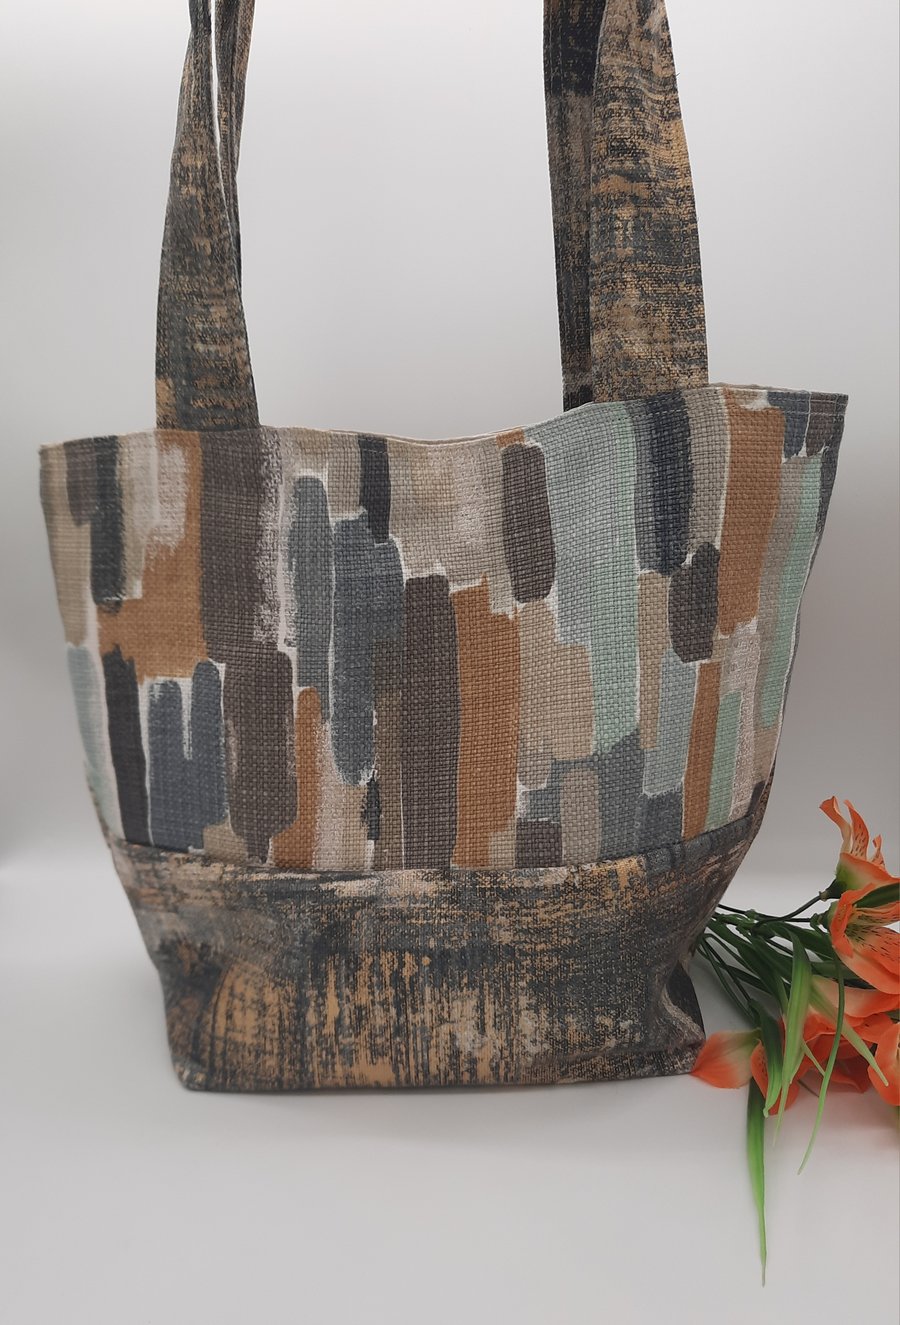 Tote bag gold and grey, free UK delivery.